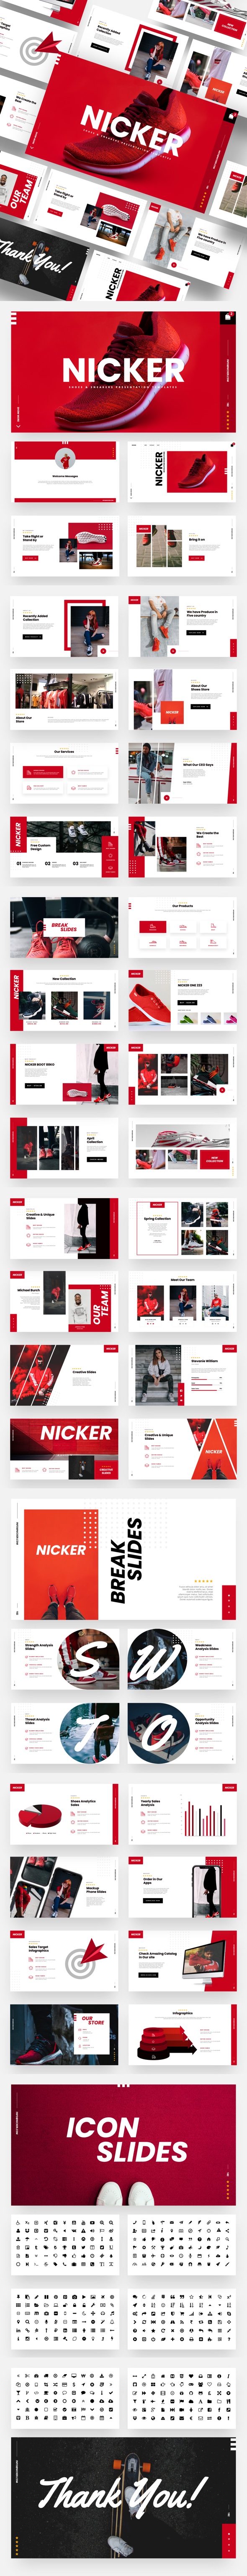 Nicker - Shoes & Sneakers Powerpoint Template